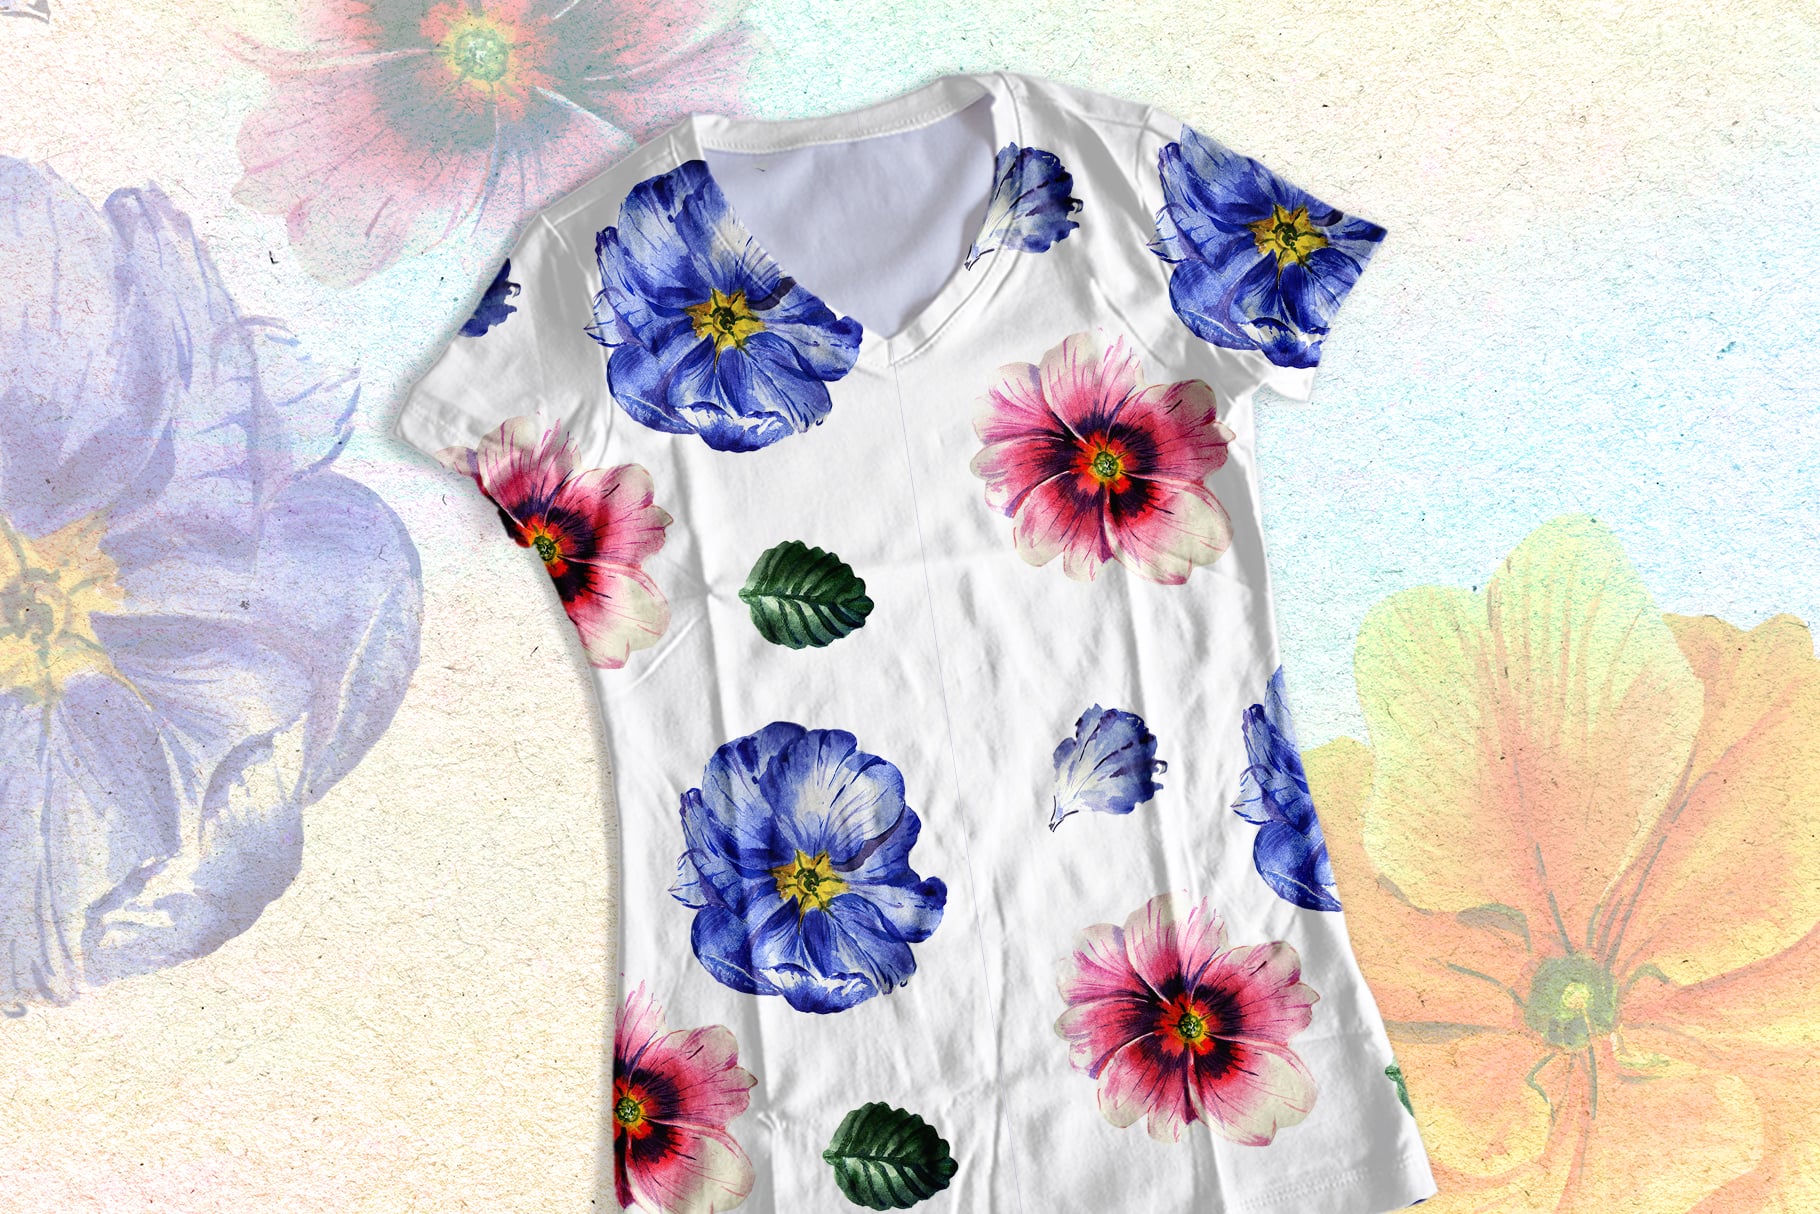 White t-shirt with Primrose or Primula Flowers.